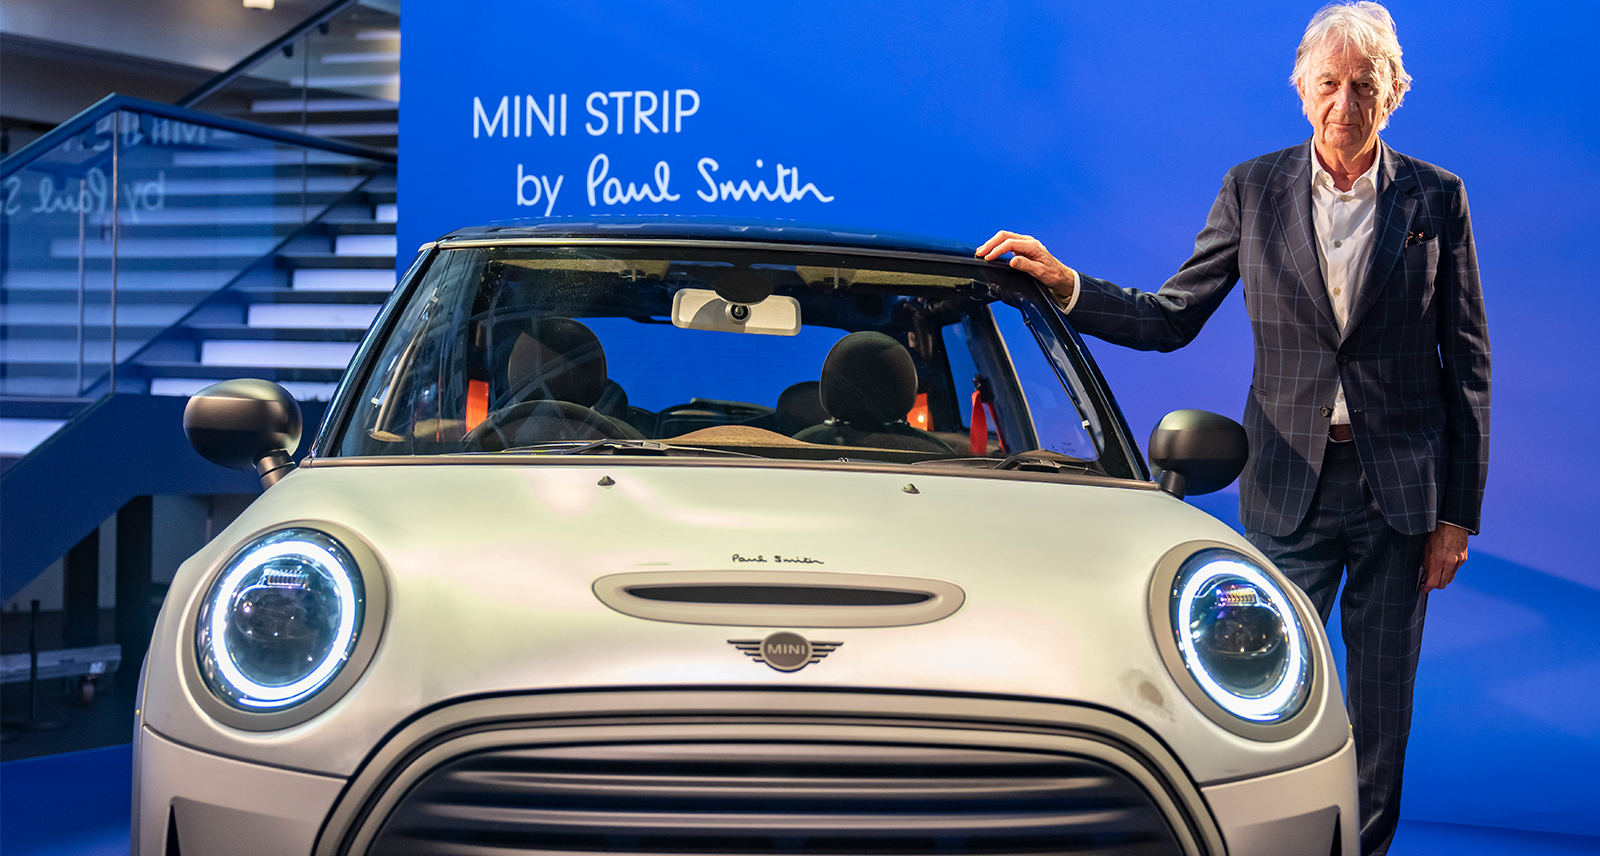 Paul Smith Interview: Discussing Life, Style, and Cars - Sharp